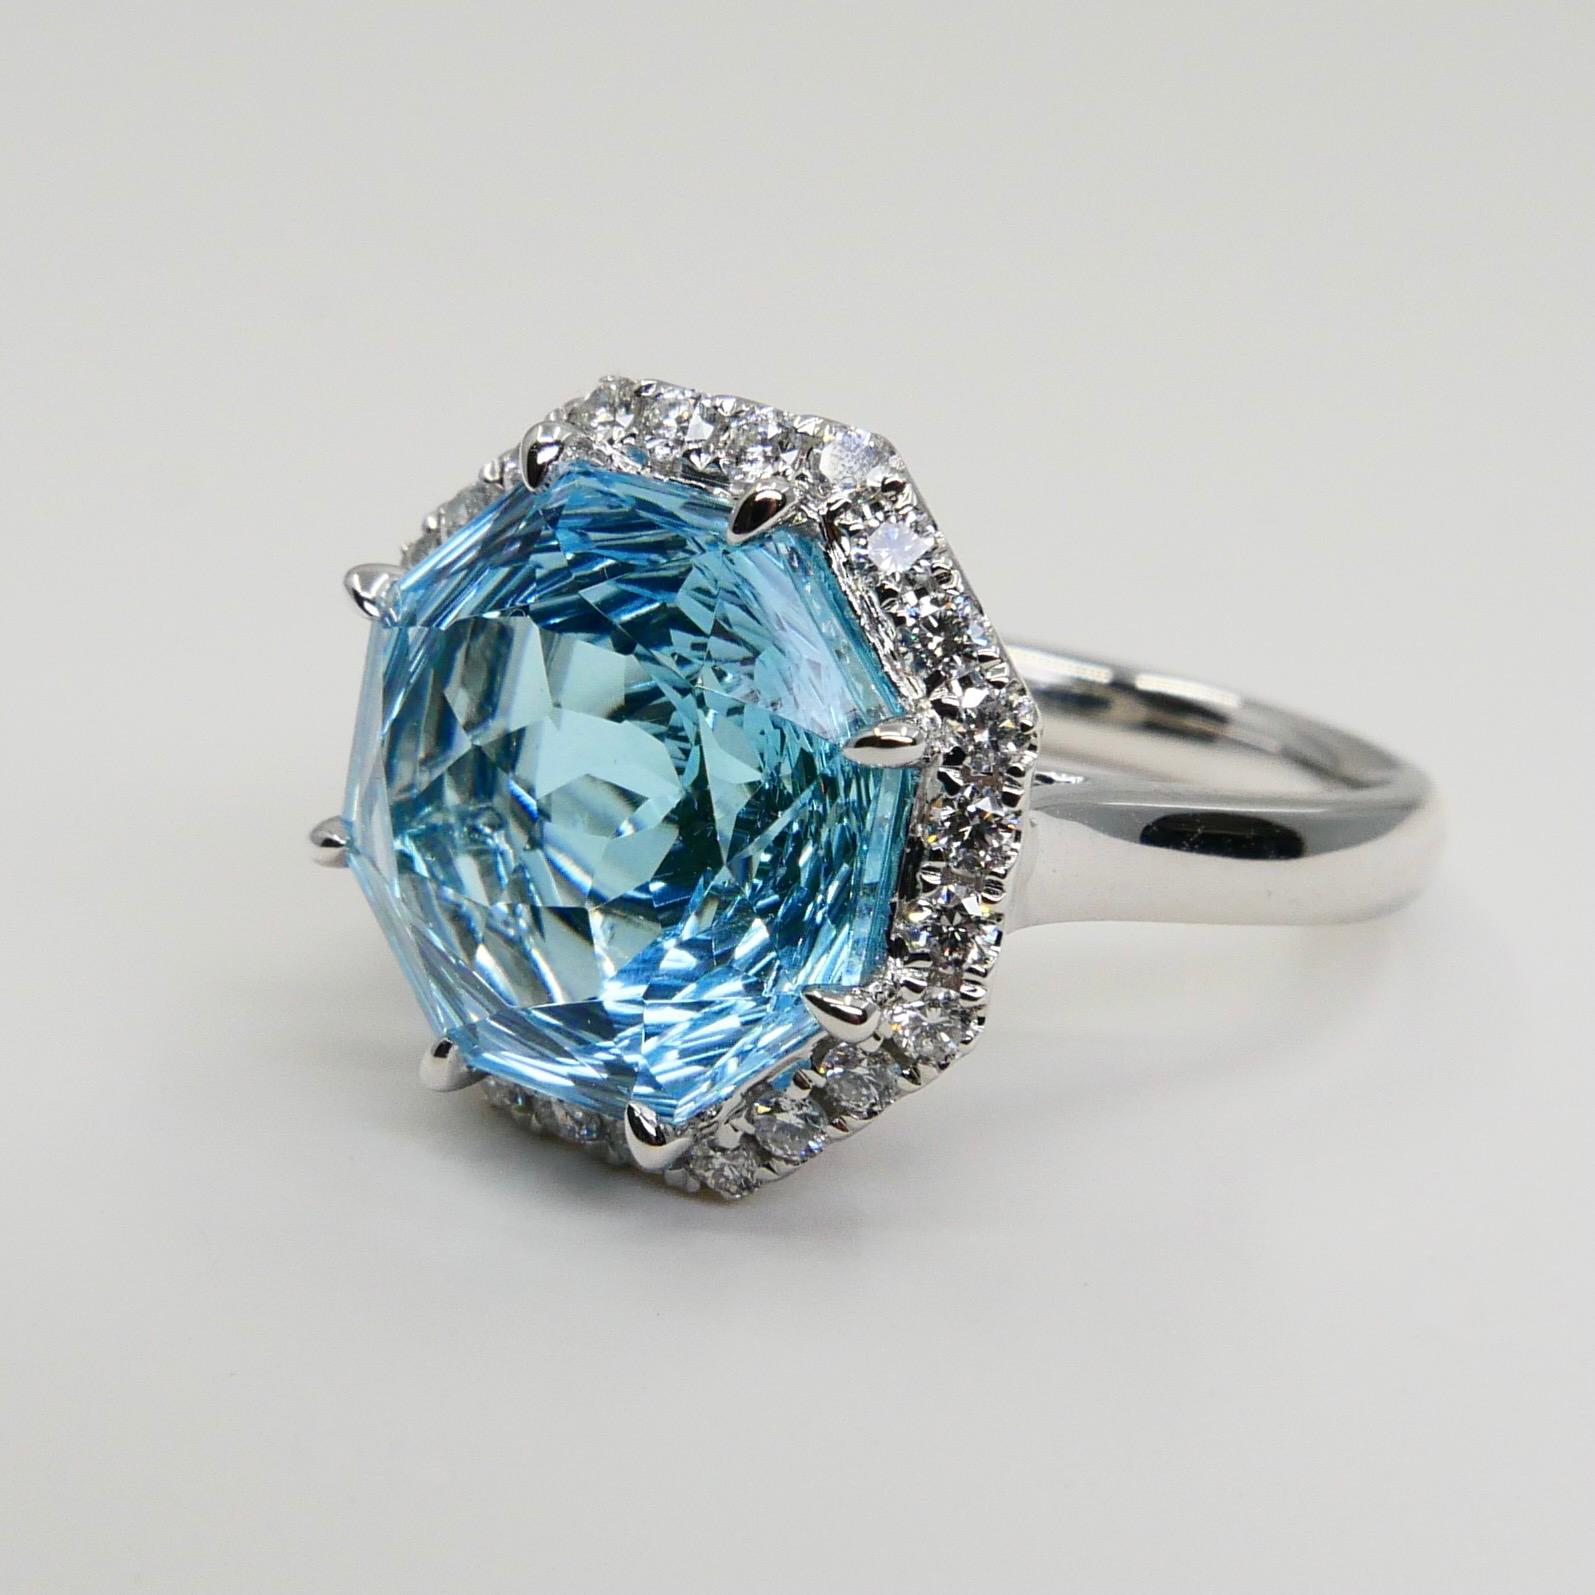 Women's Flower Cut Powder Blue Topaz 7.86 Cts and Diamond Cocktail Ring, Statement Ring For Sale